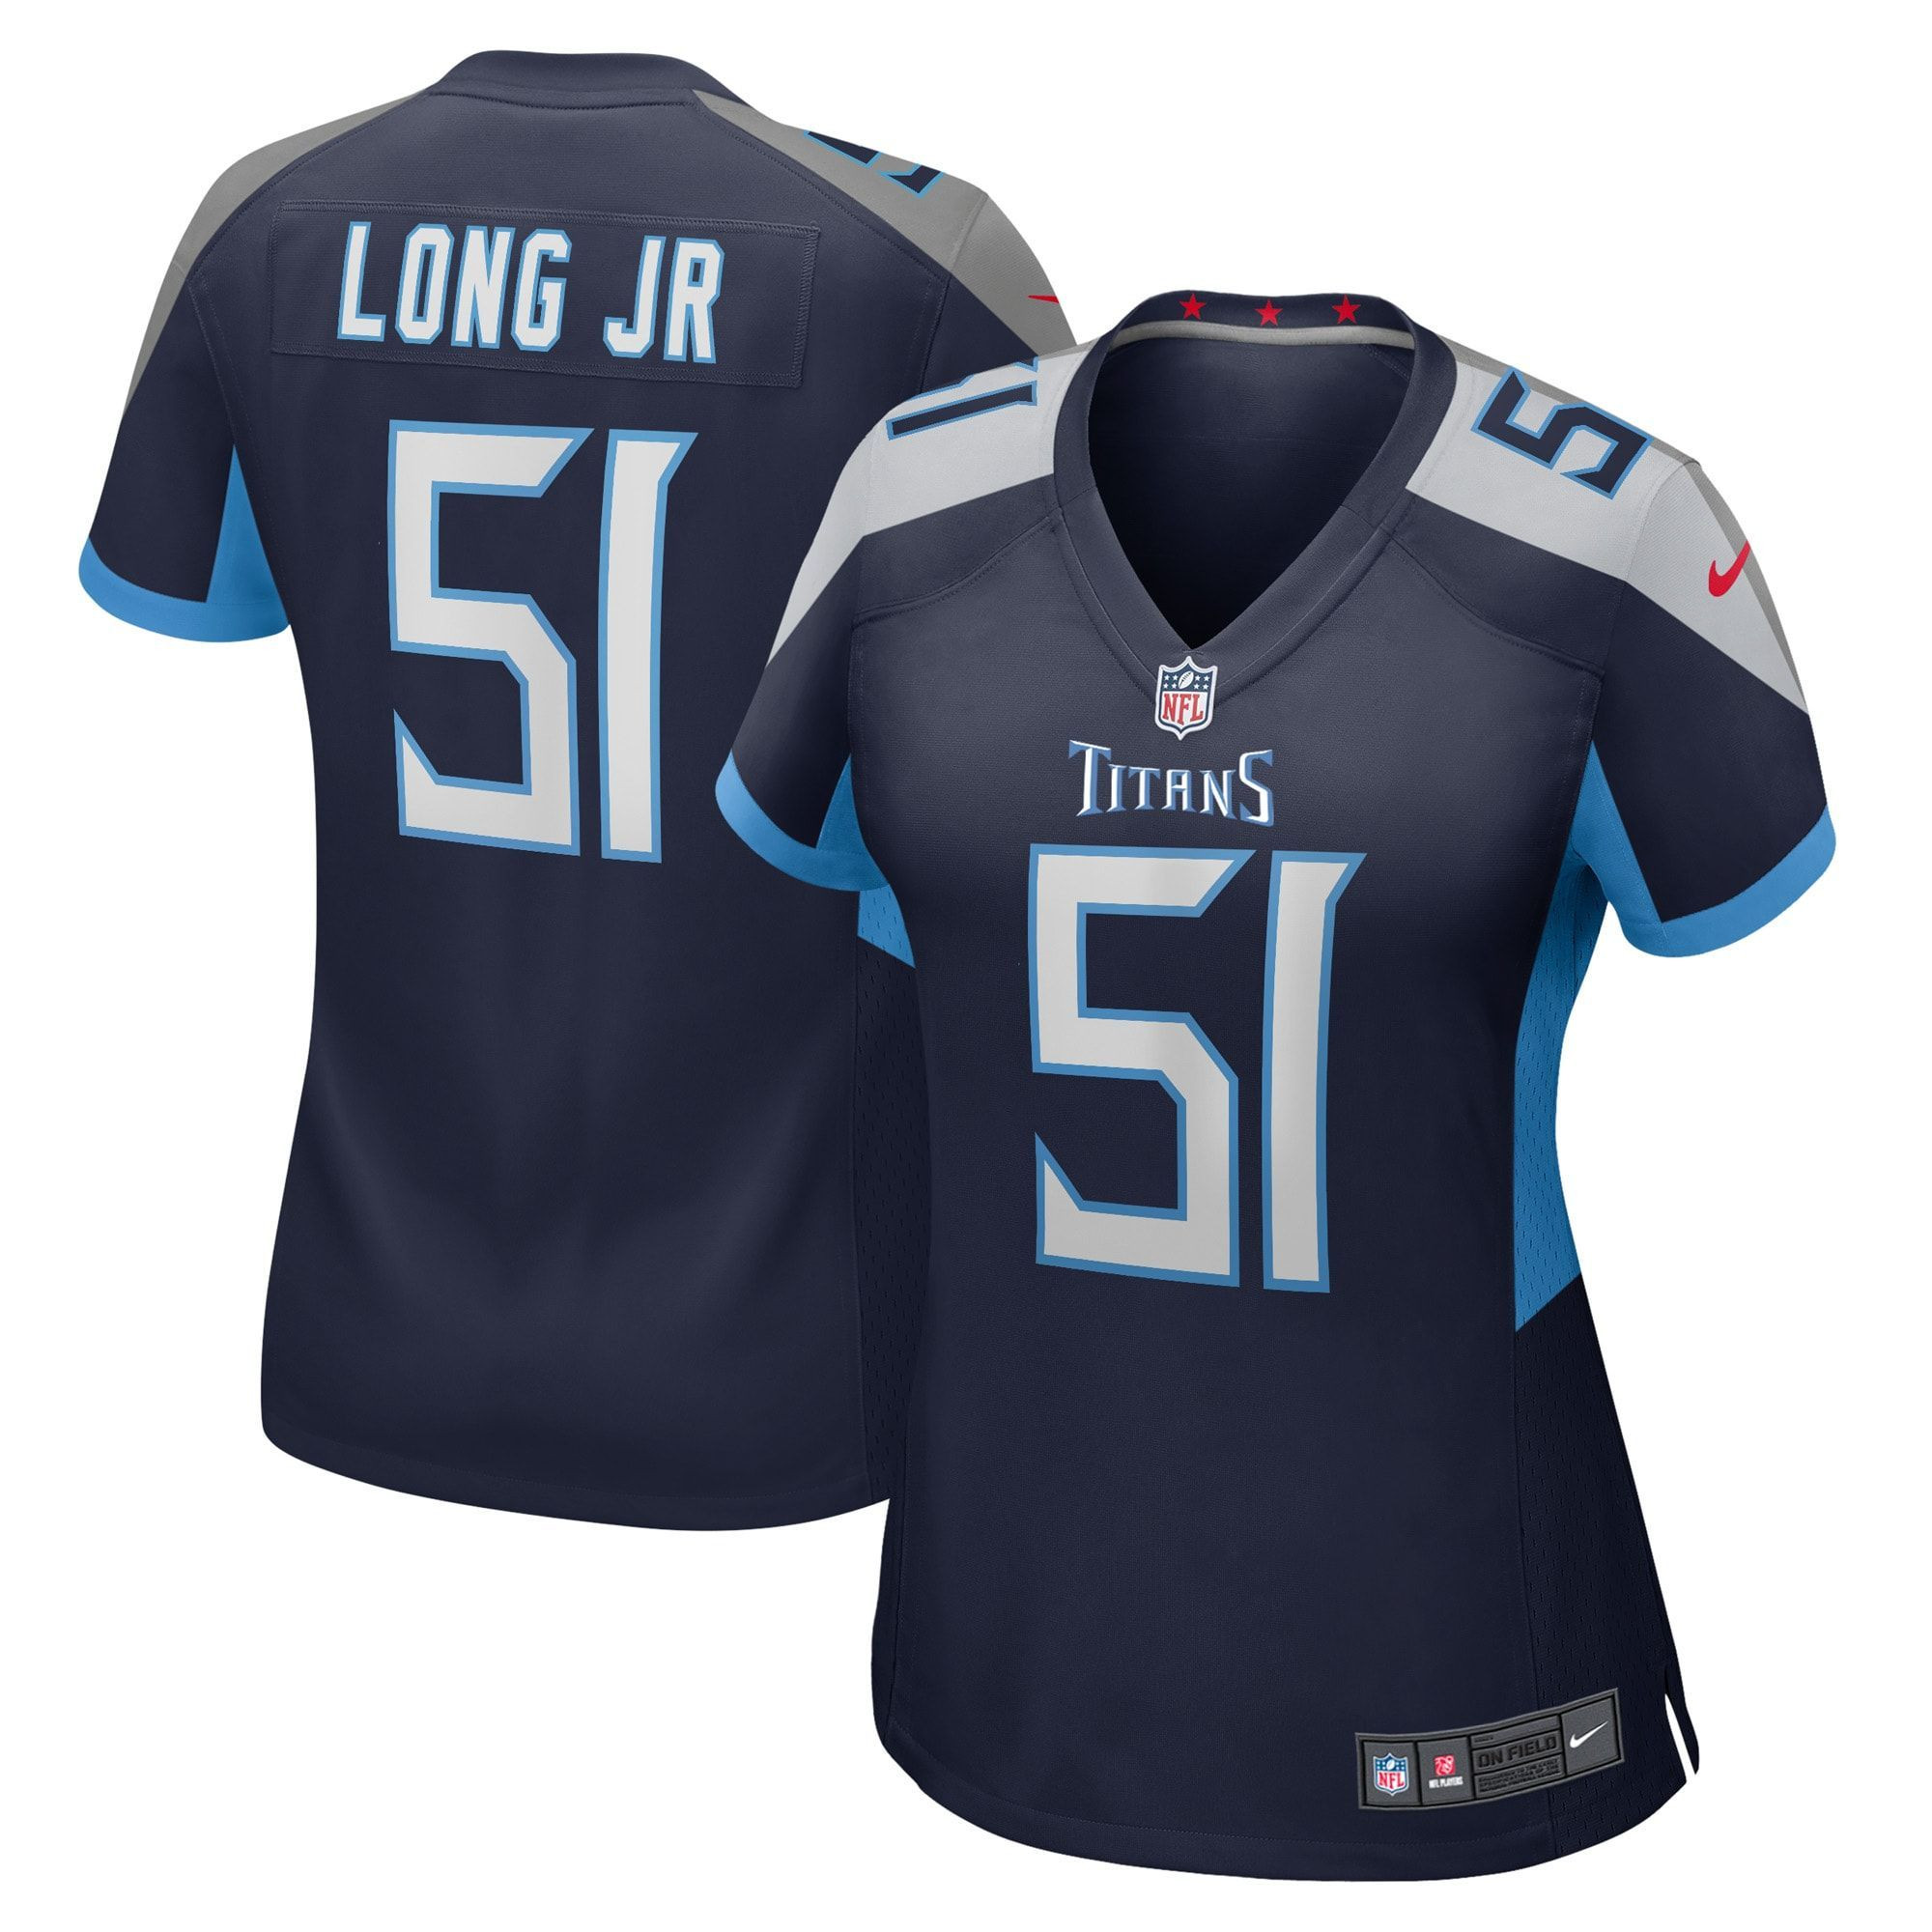 Womens Tennessee Titans David Long Jr Navy Game Jersey Gift for Tennessee Titans fans